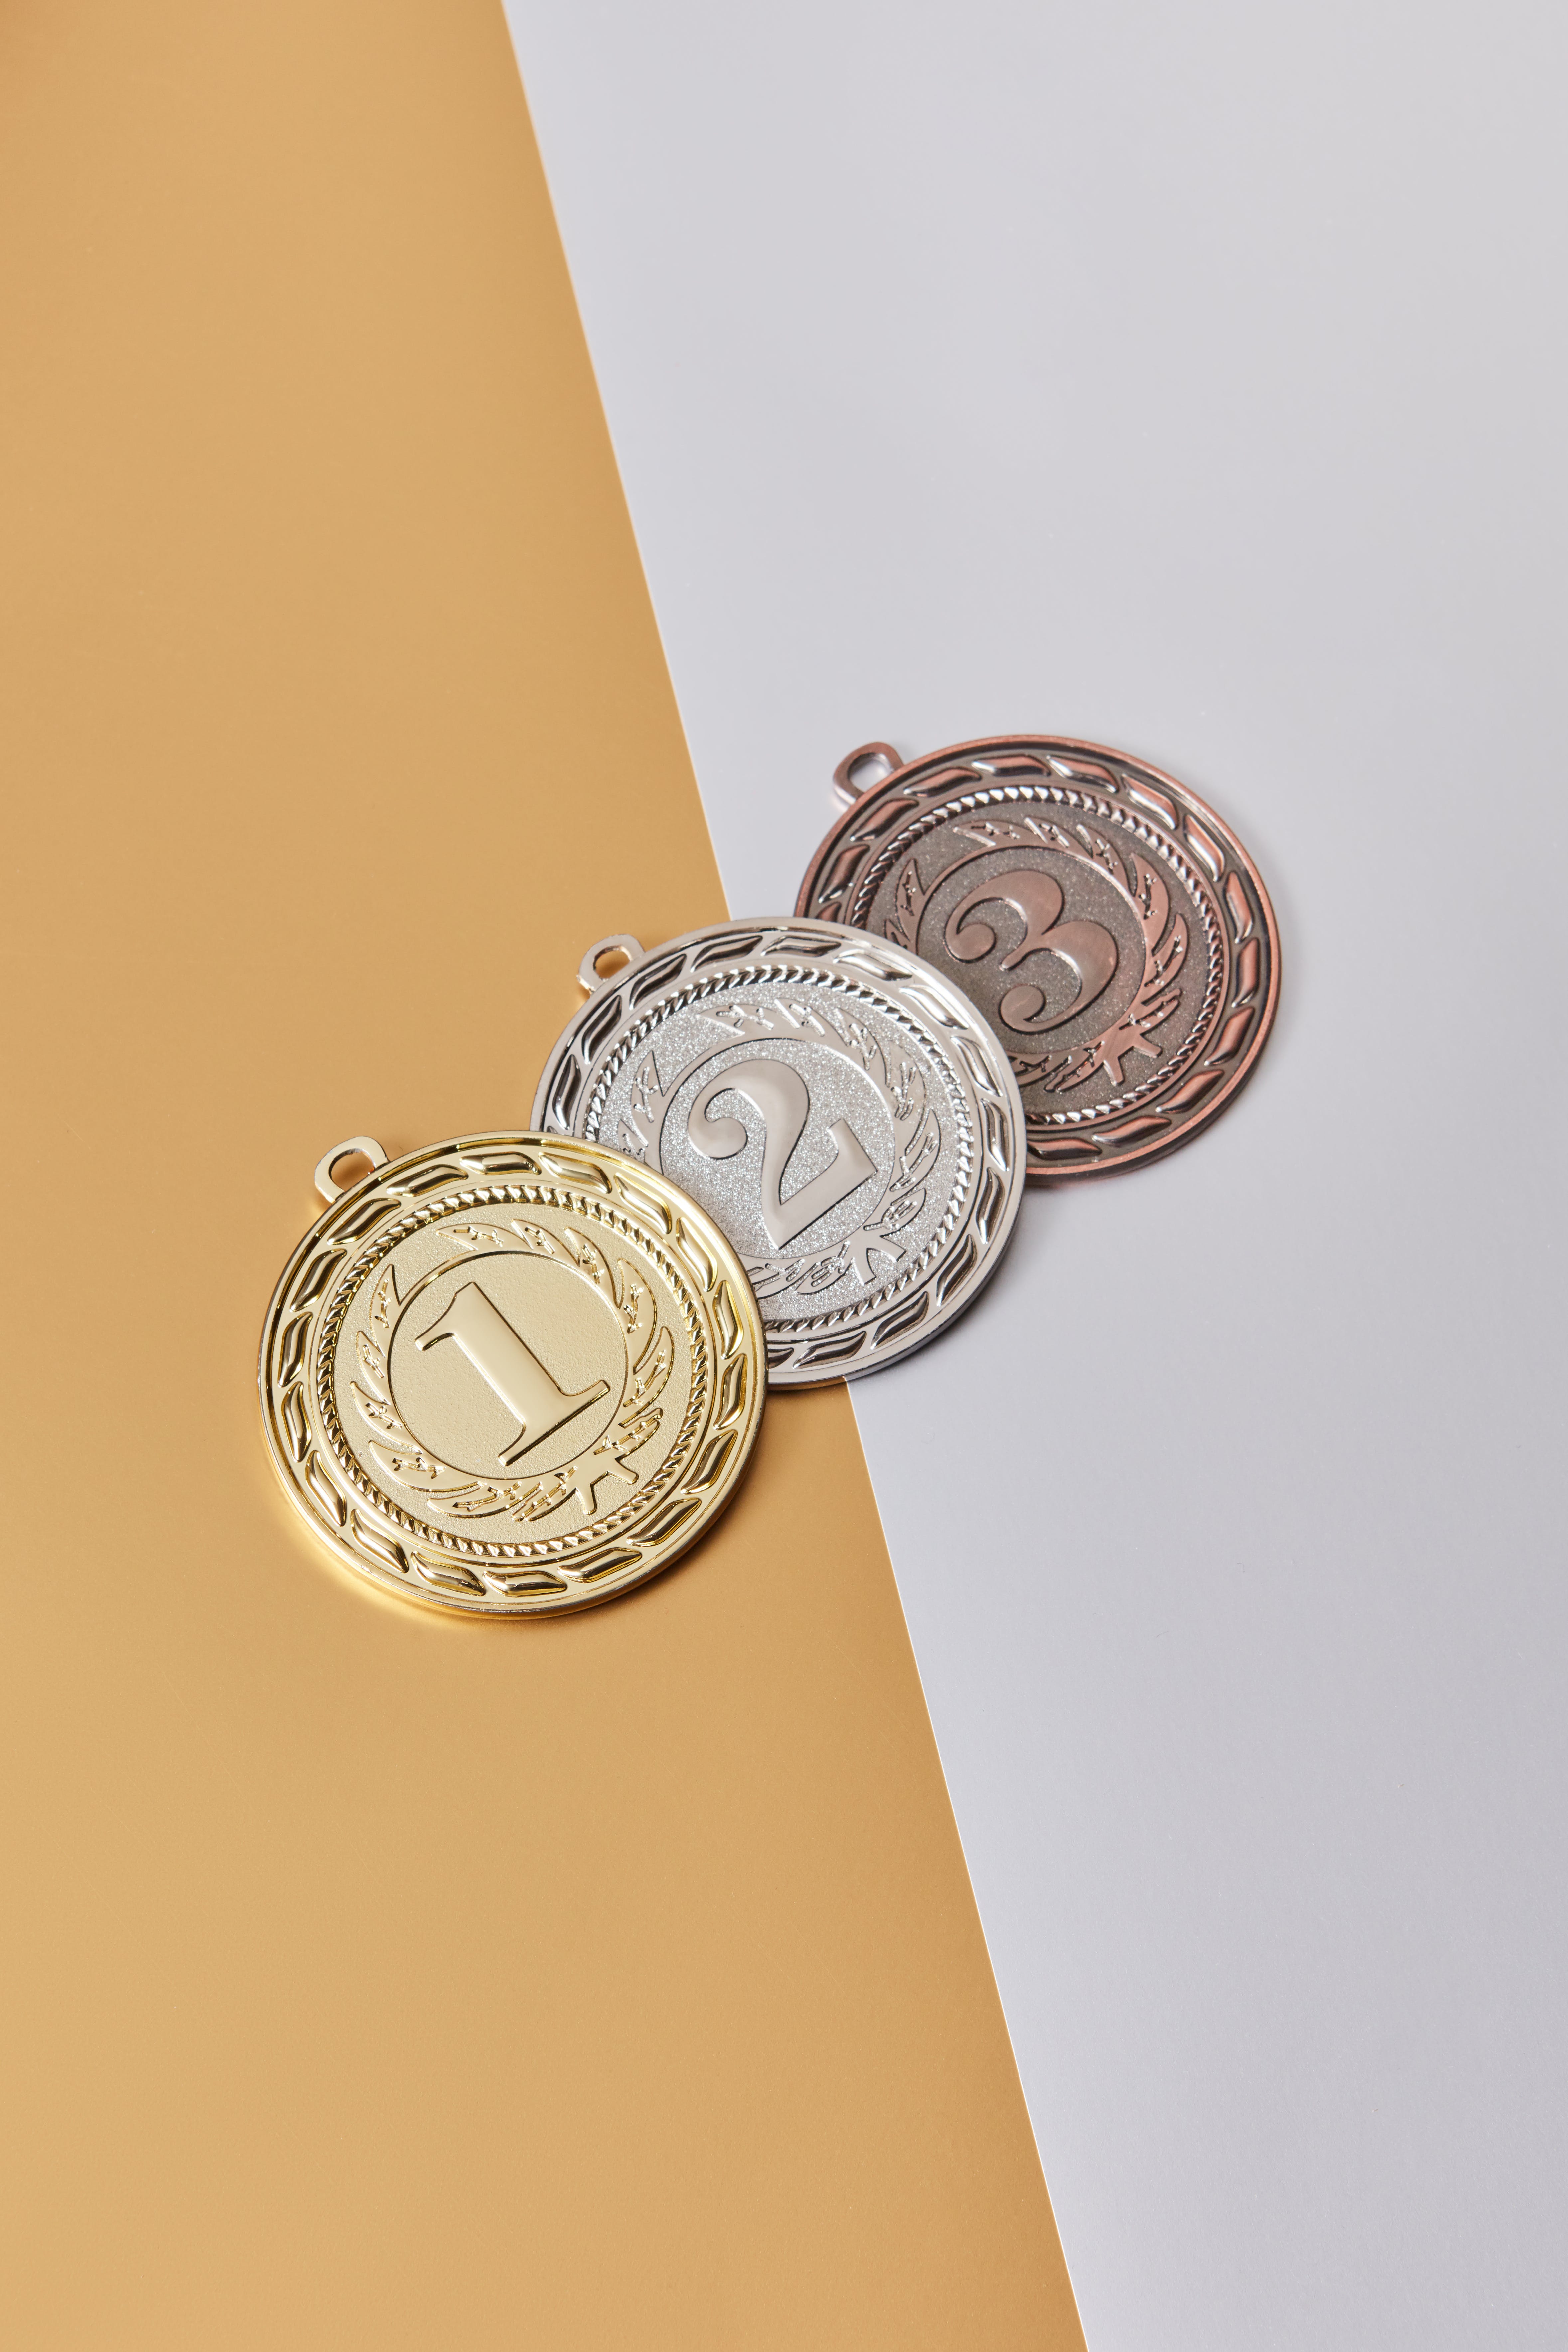 gold silver and bronze round medals